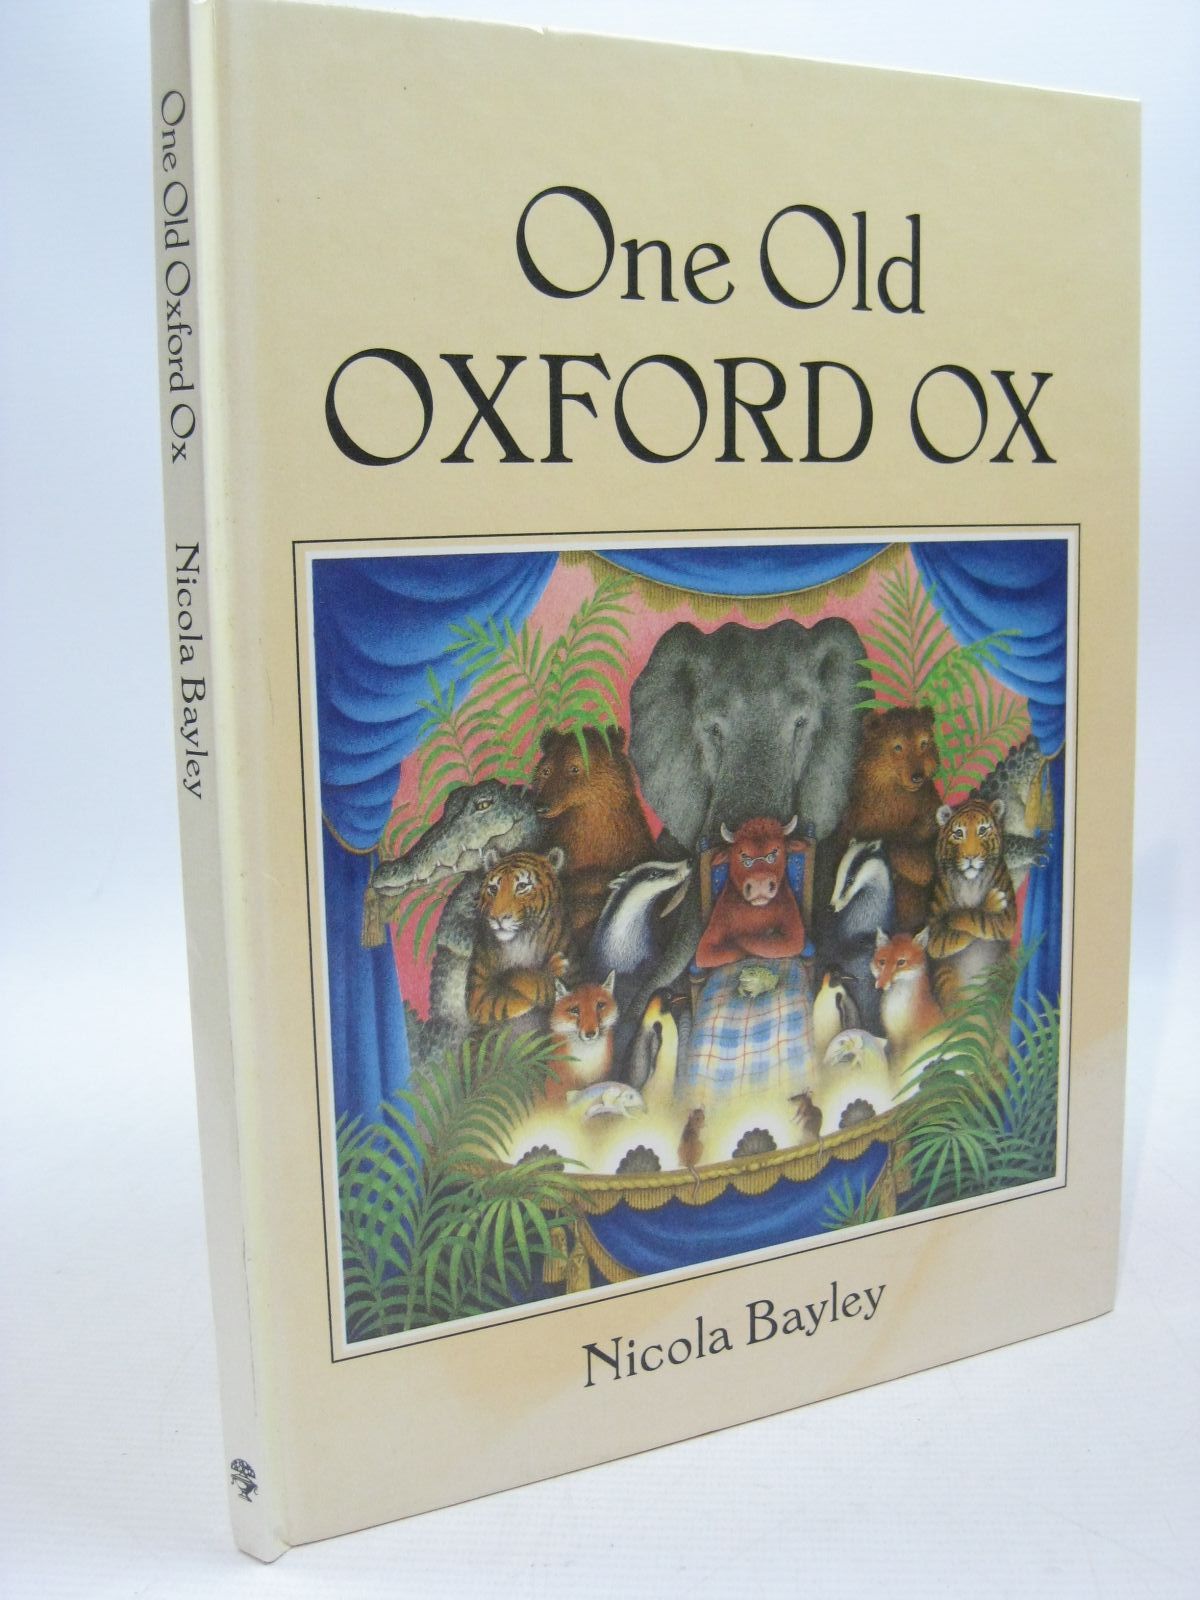 Photo of ONE OLD OXFORD OX written by Bayley, Nicola illustrated by Bayley, Nicola published by Jonathan Cape (STOCK CODE: 1504452)  for sale by Stella & Rose's Books